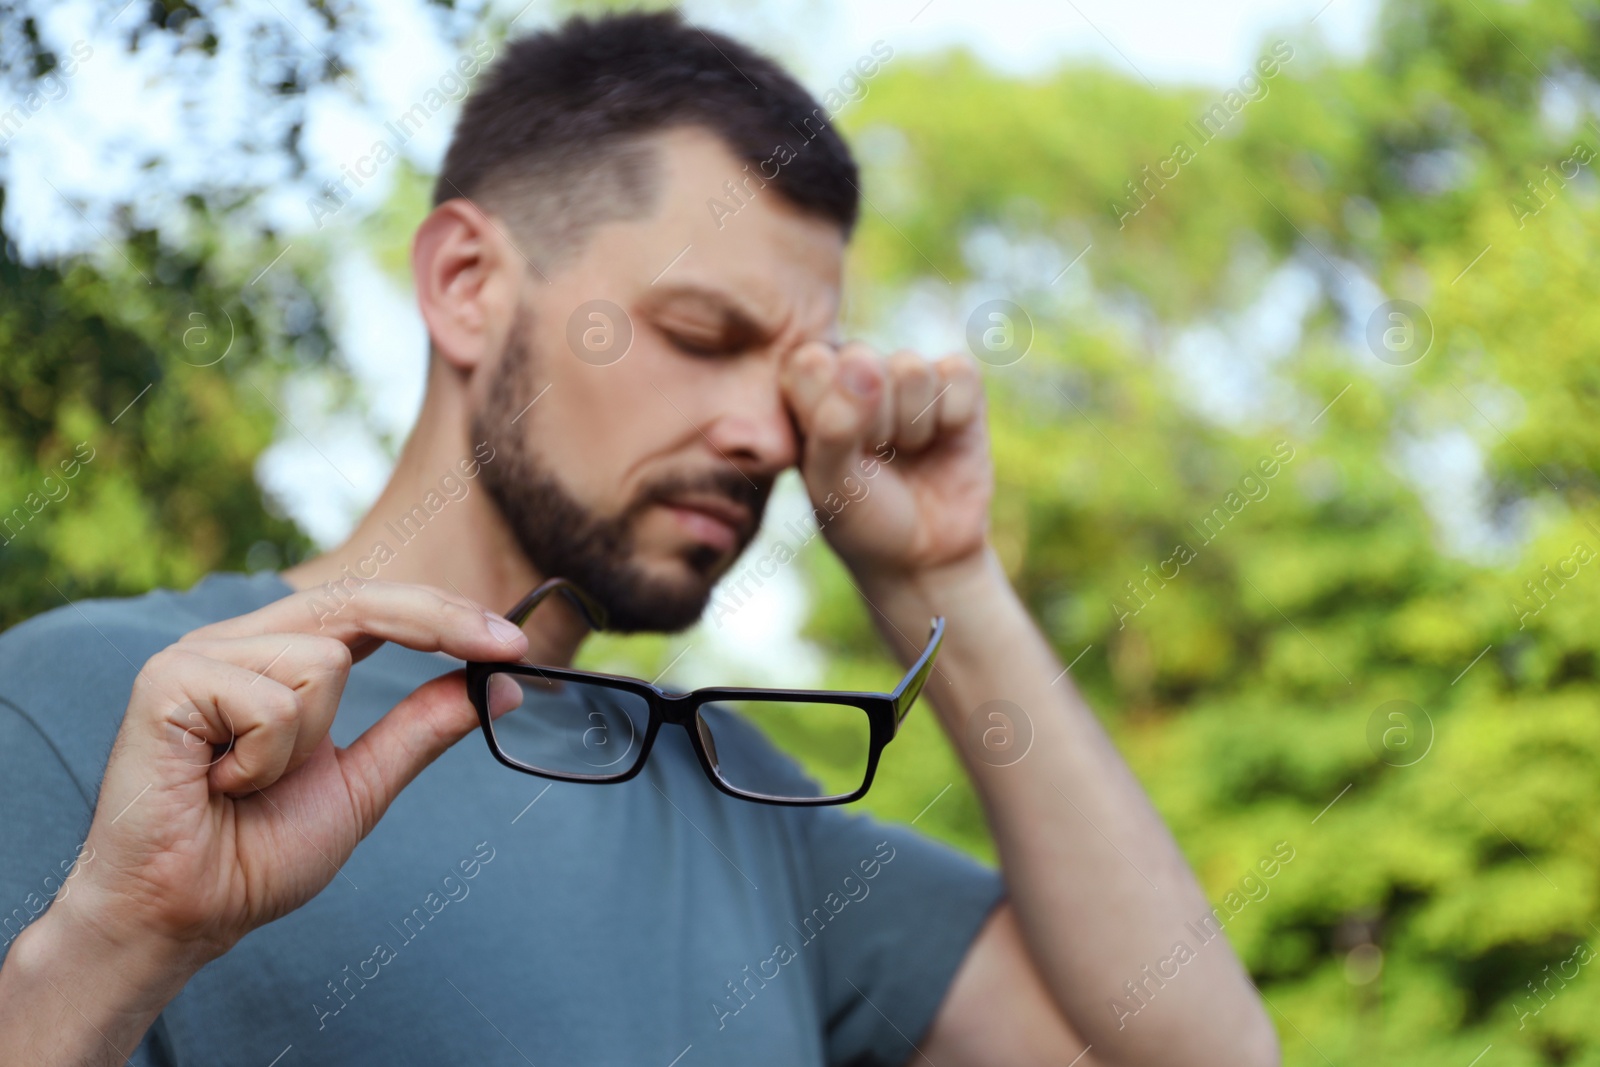 Photo of Man suffering from eyestrain outdoors, focus on hand with glasses